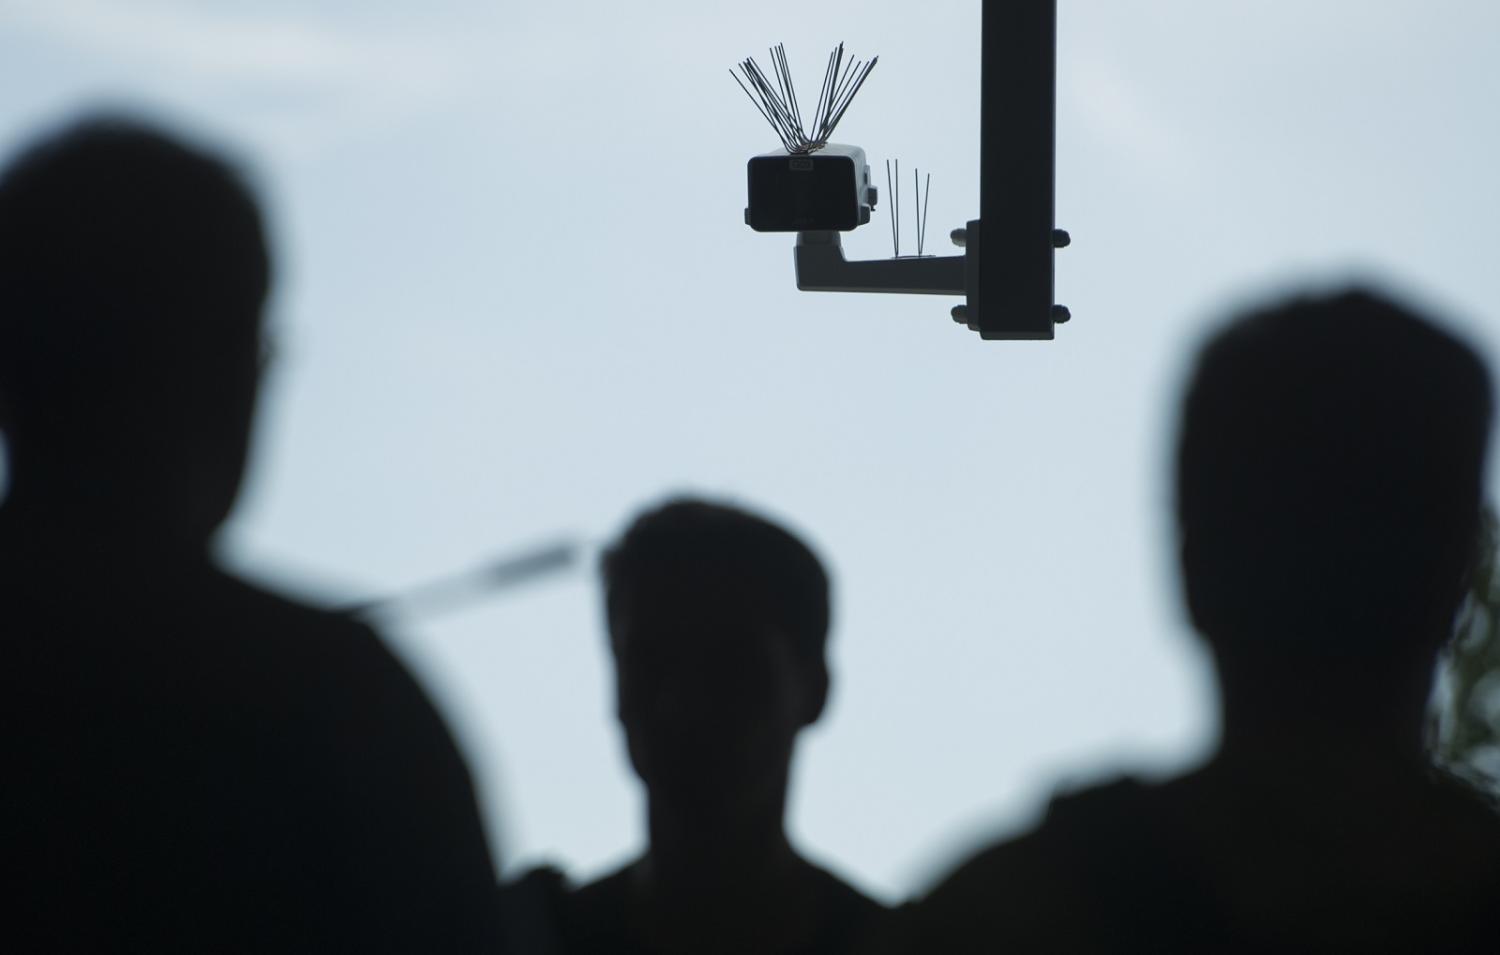 Facial recognition technologies tested on a crowd (Photo: Steffi Loos/Getty)